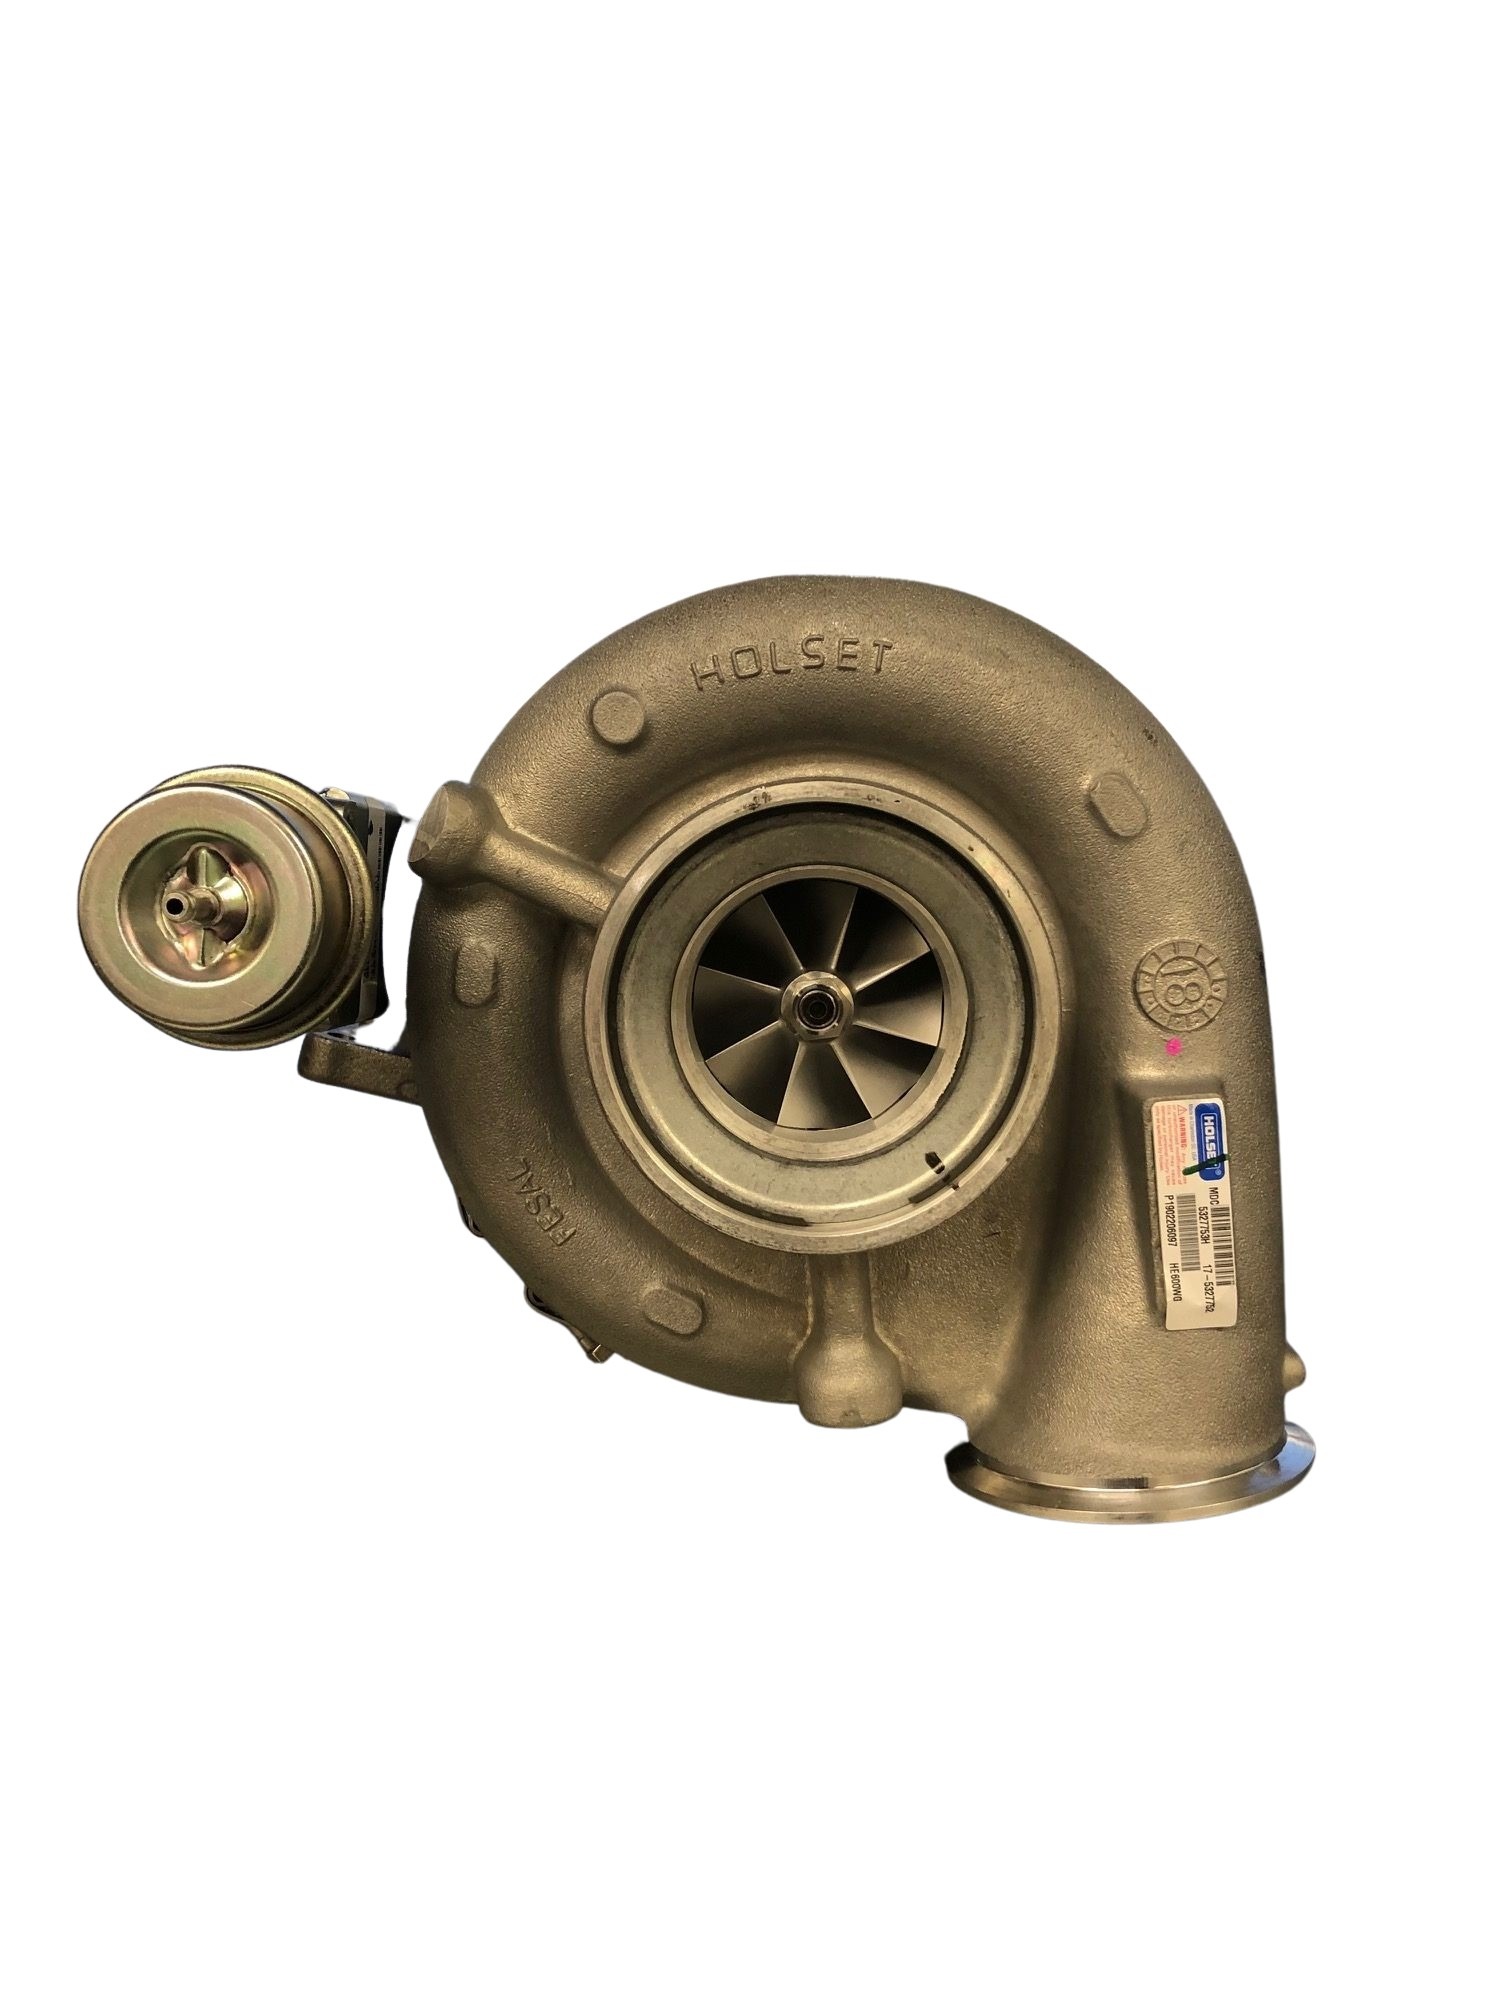 Online Turbocharger Store - Turbotech turbo sales and service